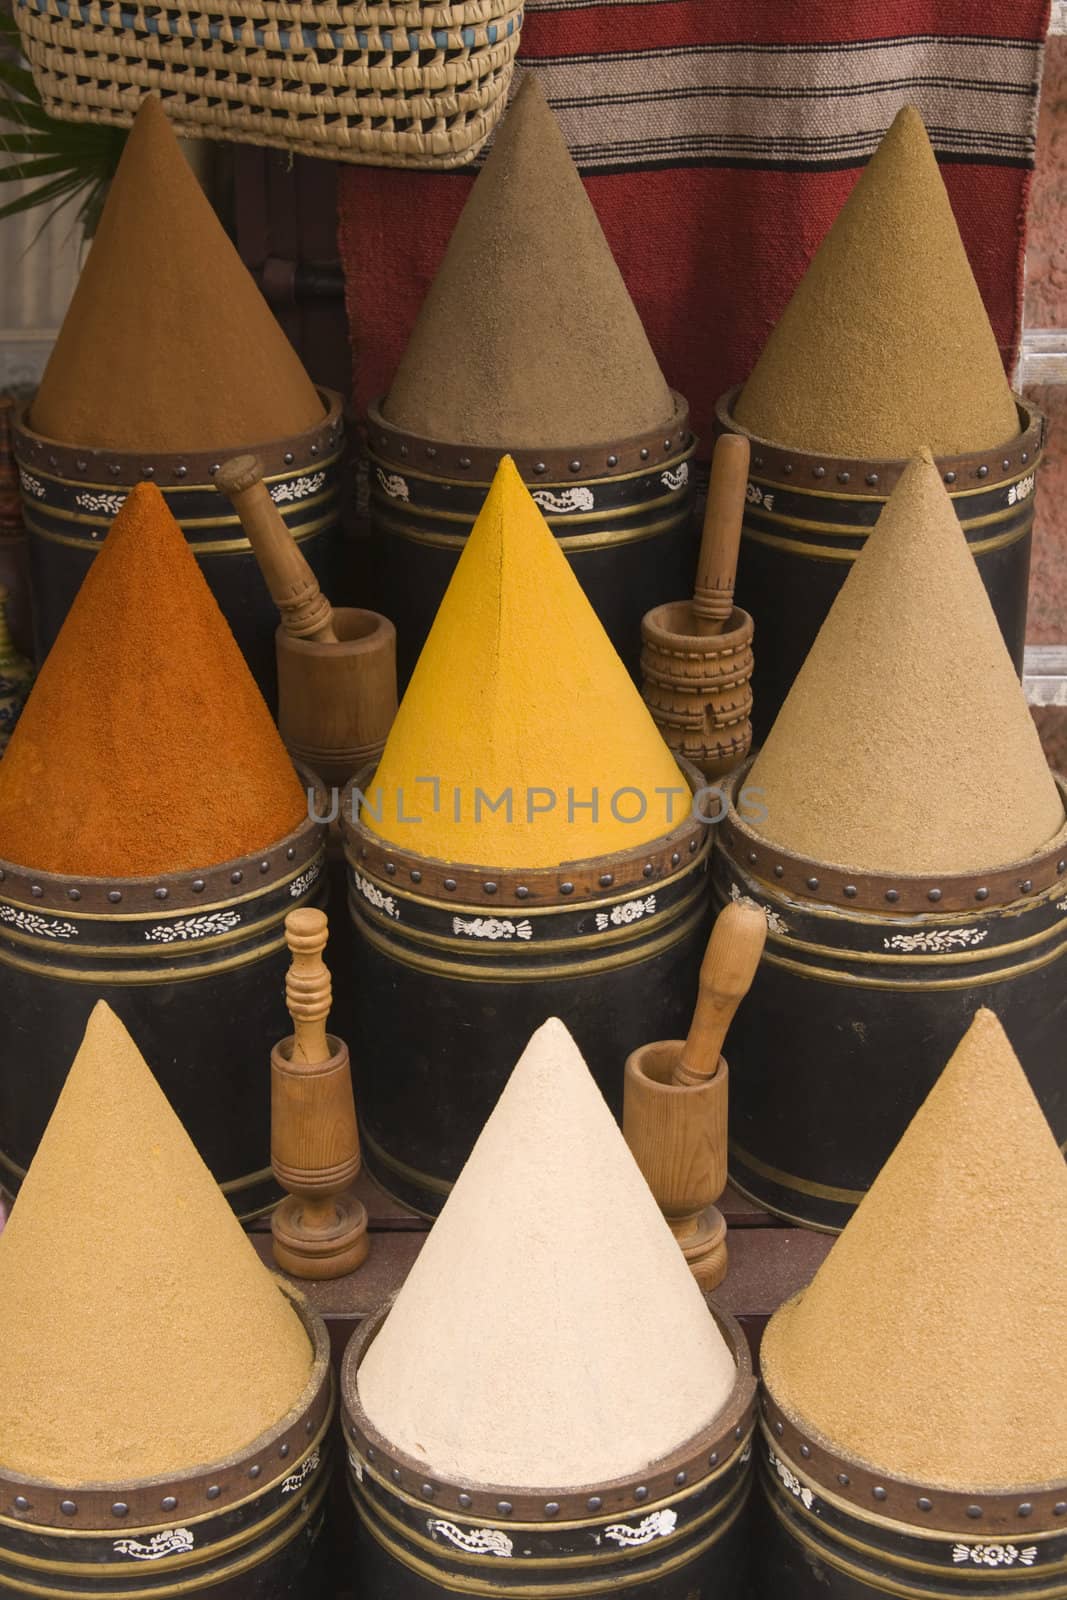 Display of spices on a market stall in the main souk in Marrakesh, Morocco.